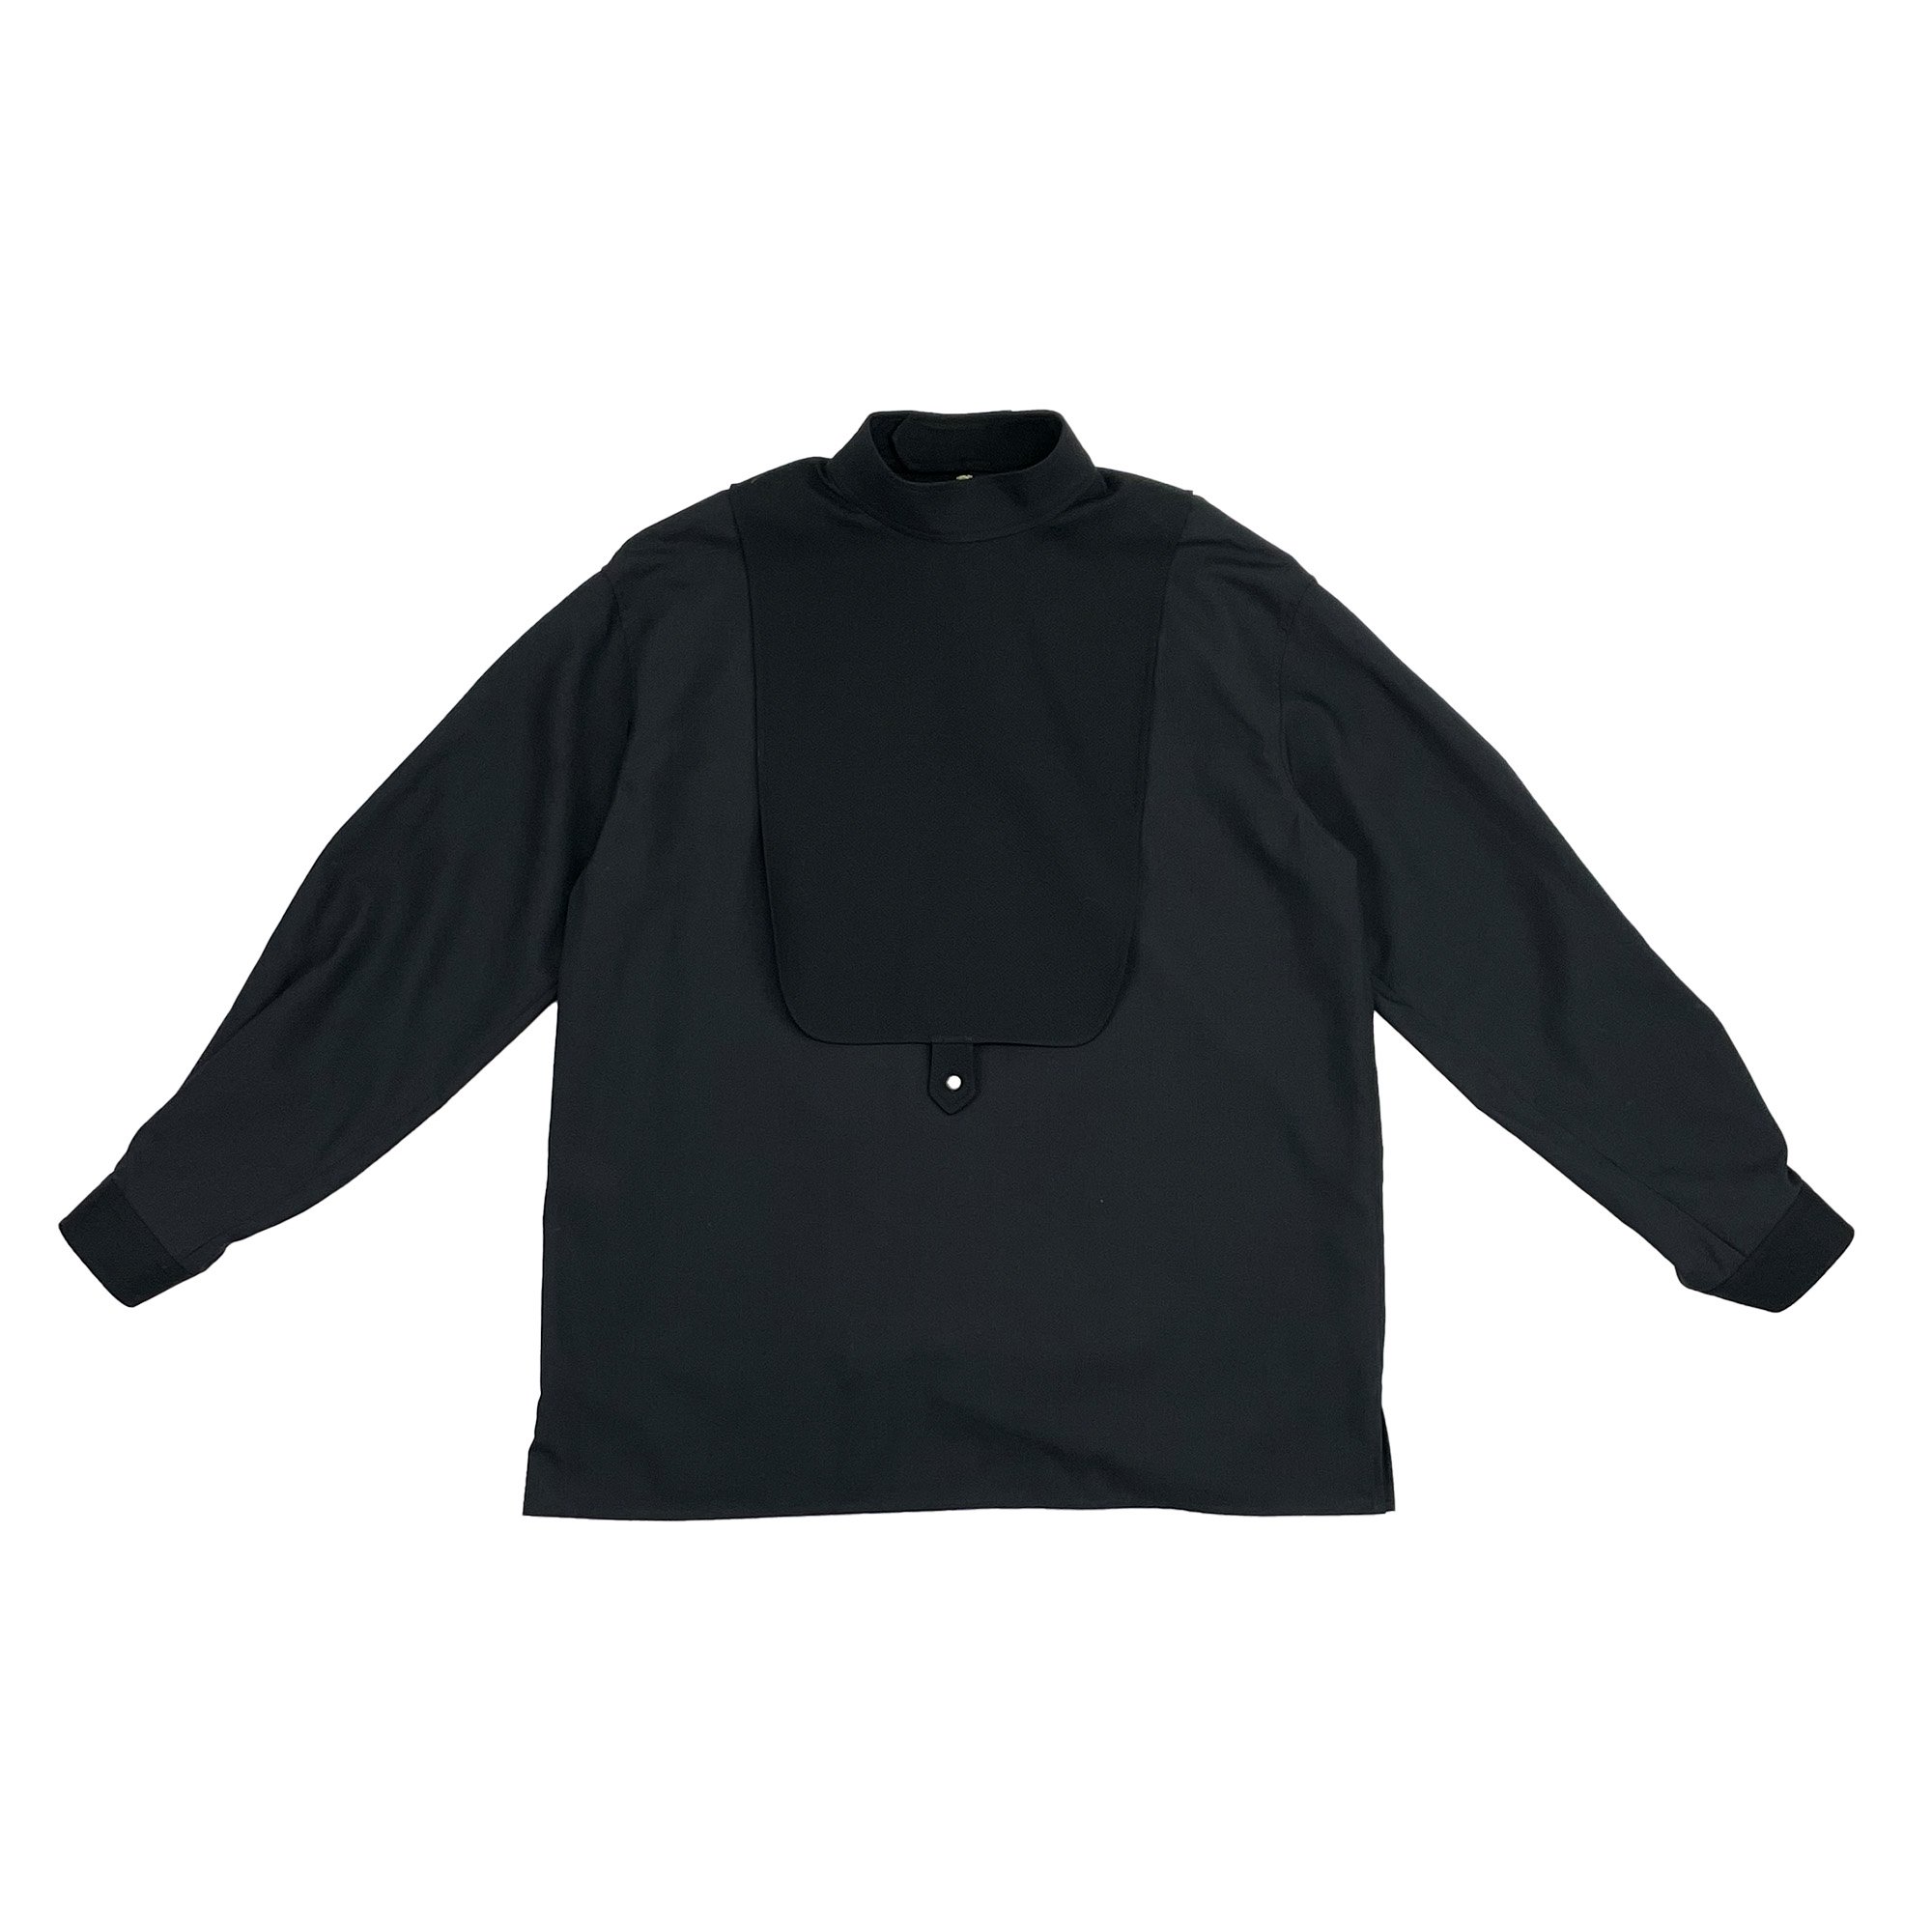 <img class='new_mark_img1' src='https://img.shop-pro.jp/img/new/icons7.gif' style='border:none;display:inline;margin:0px;padding:0px;width:auto;' />THE RERACS BIB FRONT BACKZIP PULLOVER